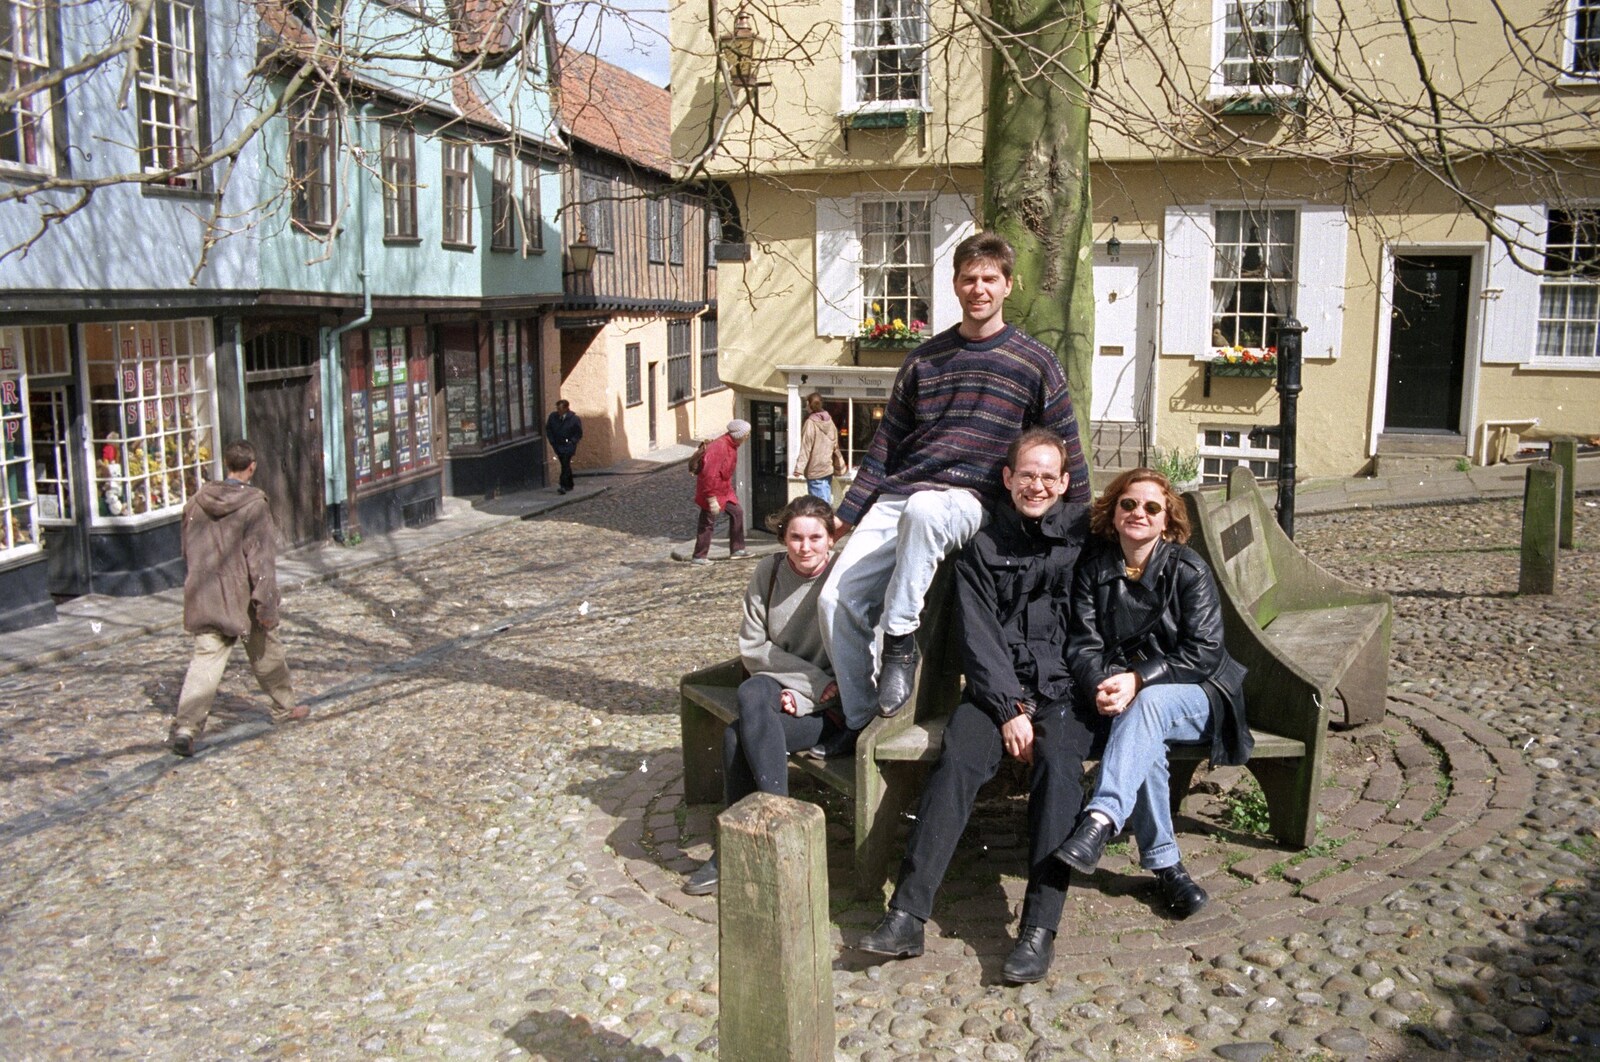 A Phil and Sean Weekend, and Bedroom Building, Brome, Norwich and Southwold - 18th April 1995: The cobbles of Elm Hill